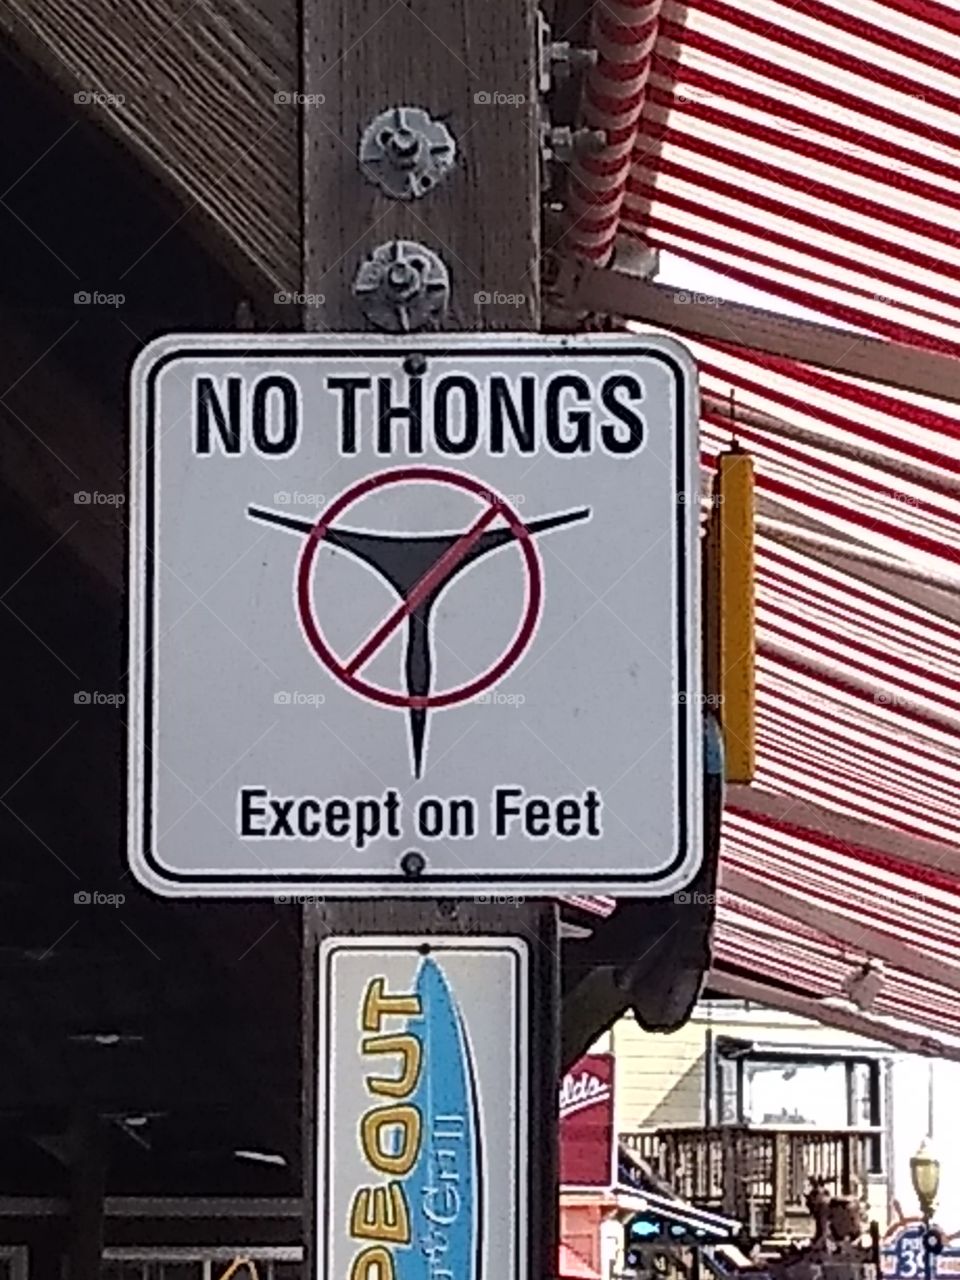 Sign seen in San Francisco.  Naturally, I and others nearby who also found themselves in violation, removed our things at once. I was in a skirt, so, but for a moment of adjustment to a cool breeze, compliance was simple for me. Others? A struggle.